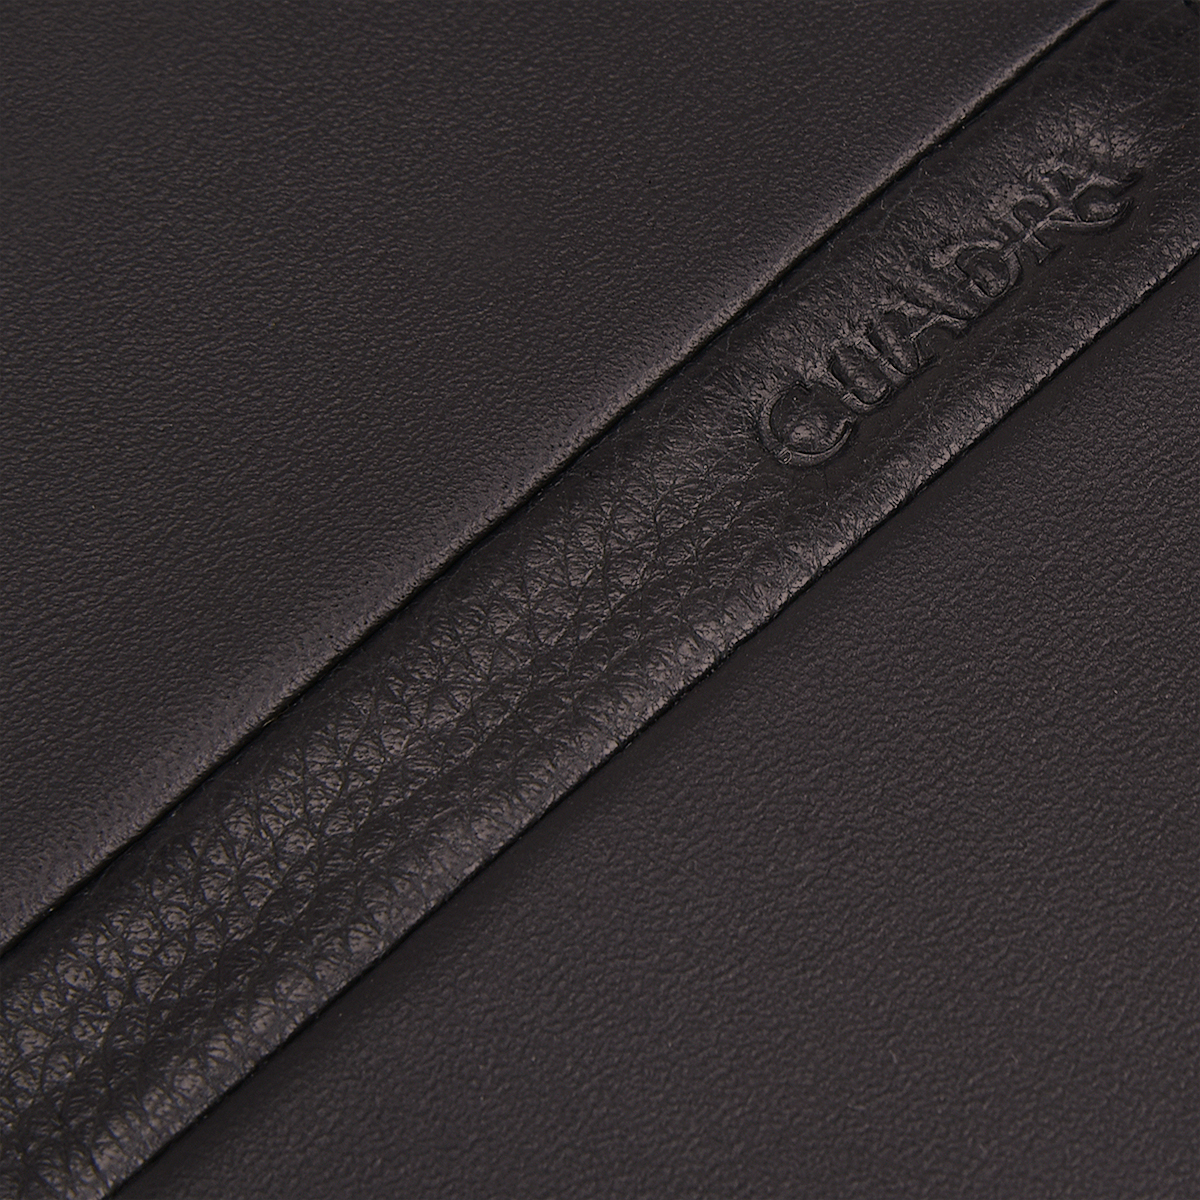 Contrasting leather strap brown leather wallet - 4597 - Cuadra Shop